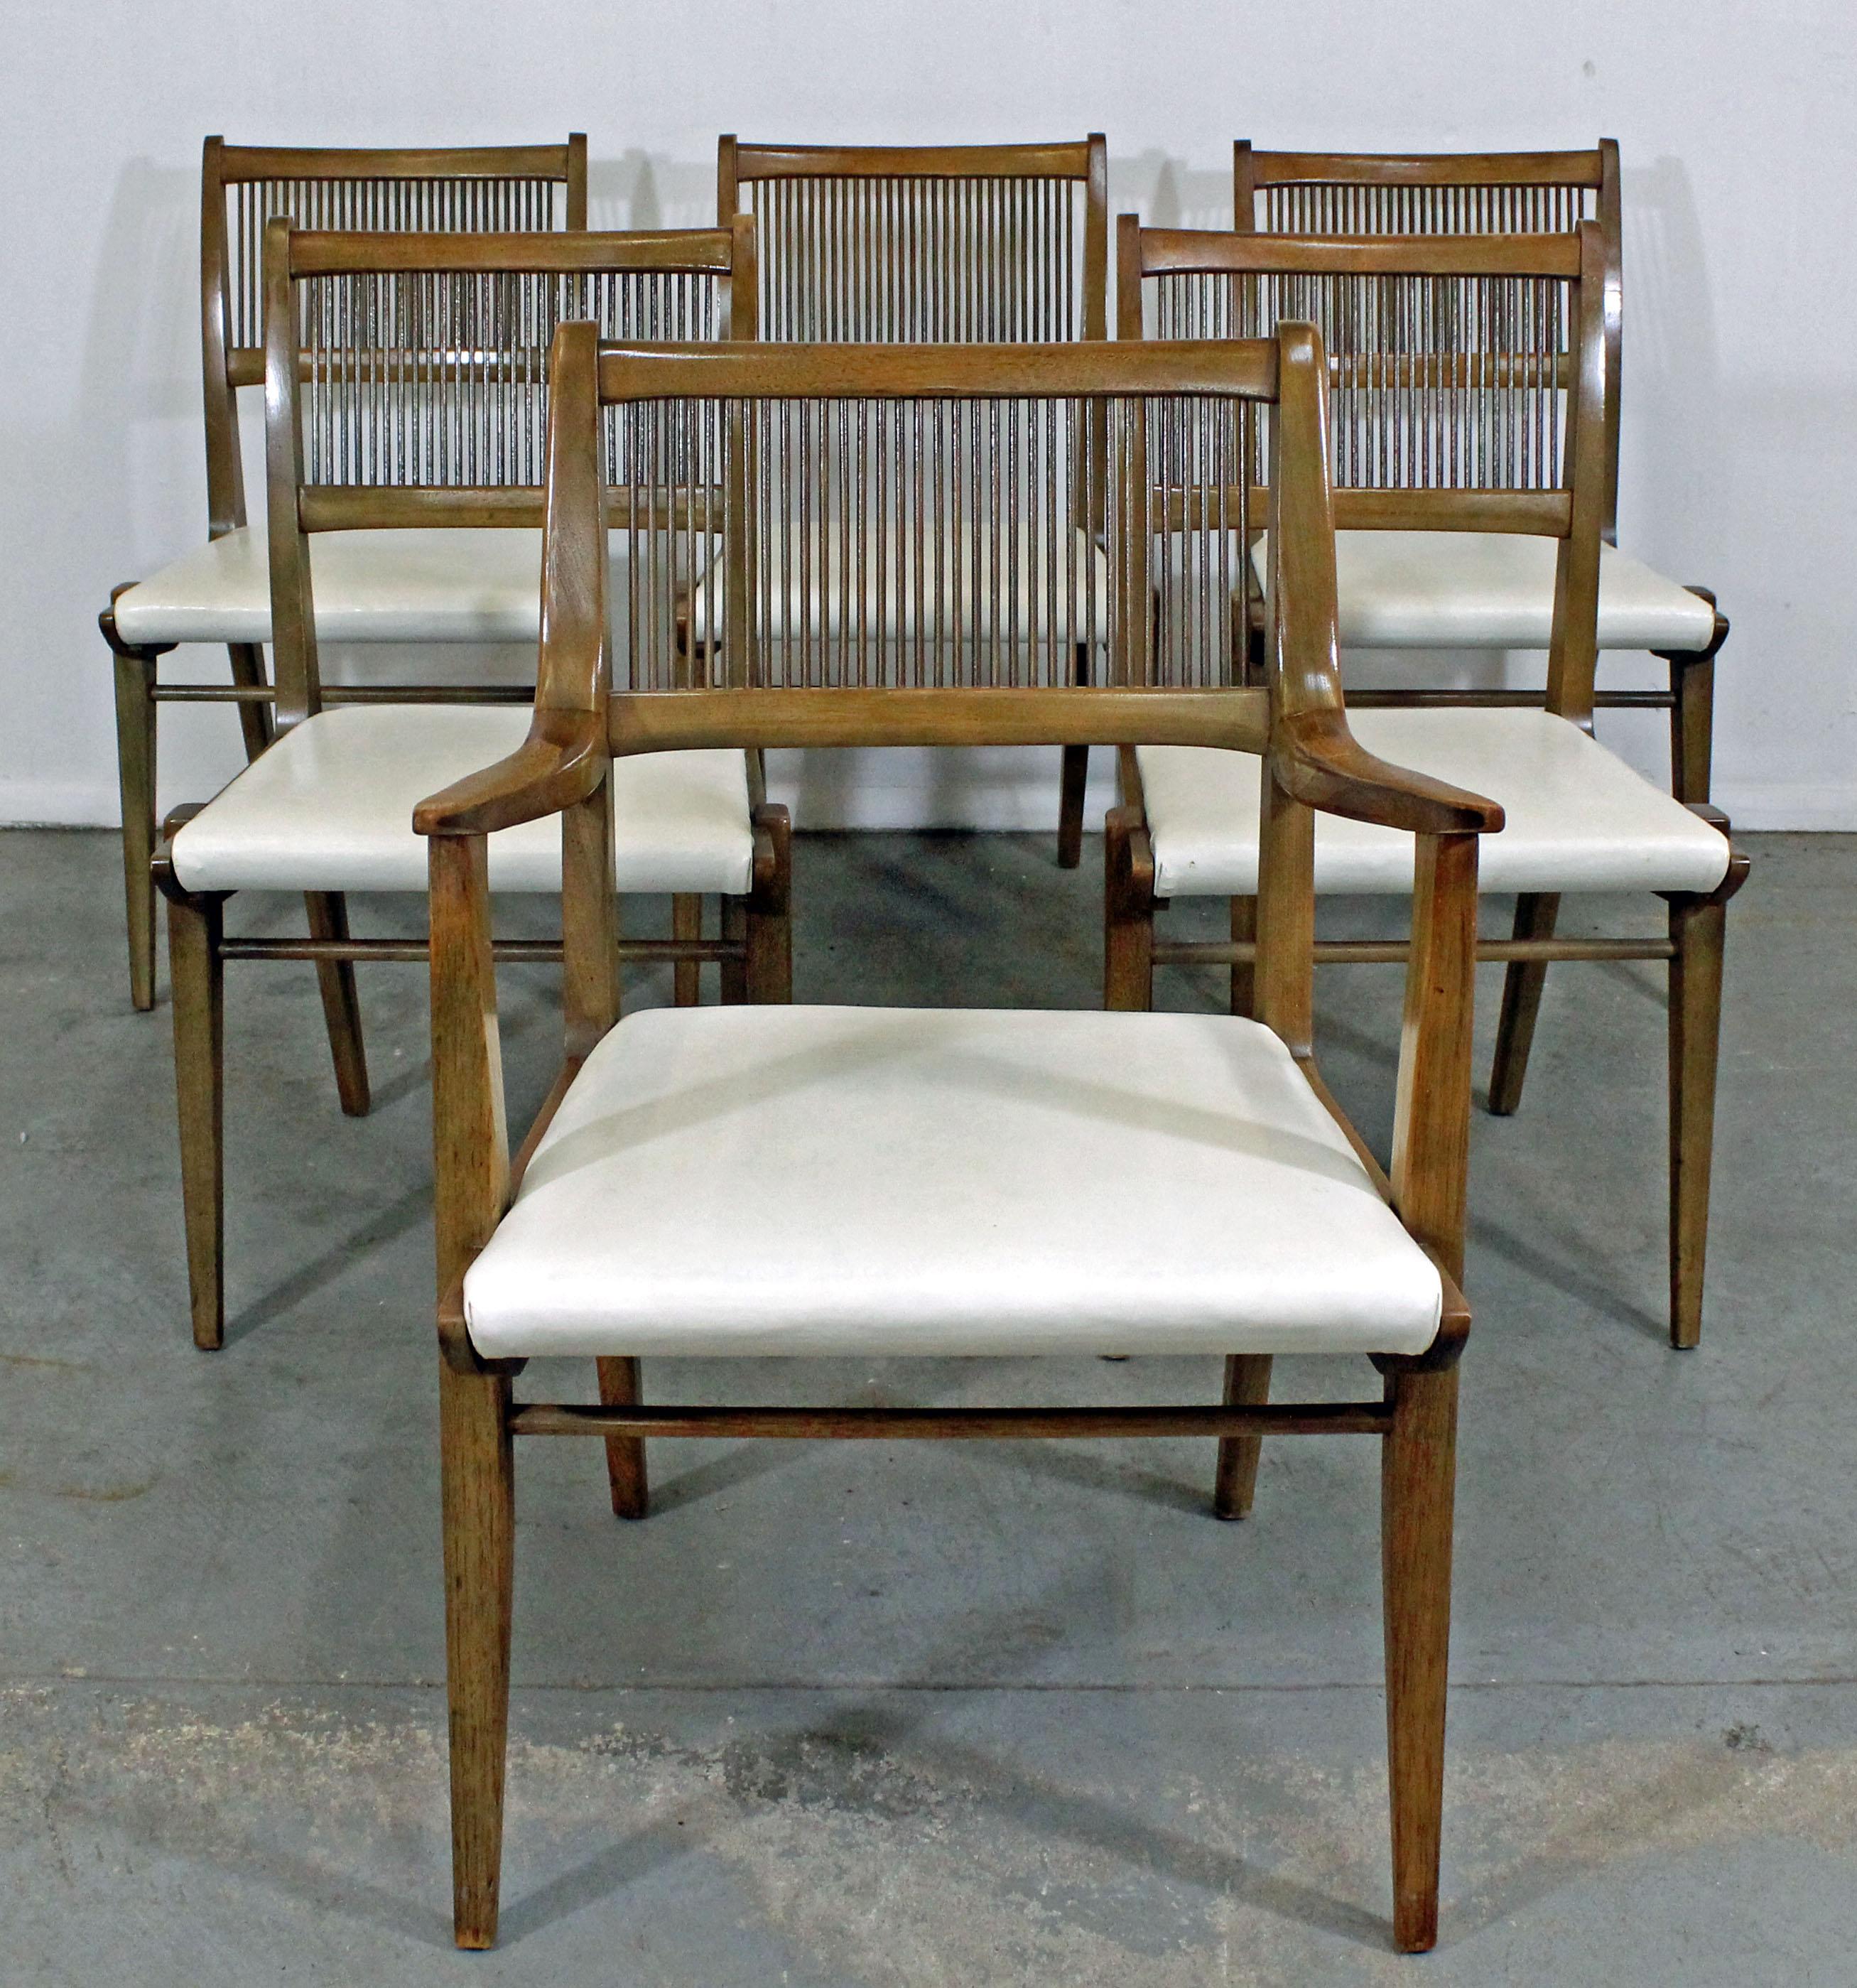 Offered is an excellent example of American mid-century modern living: a set of 6 dining chairs by John Van Koert for Drexel 'Profile'. Includes five side chairs and one arm chair. They are in overall decent condition, but show some age wear (see